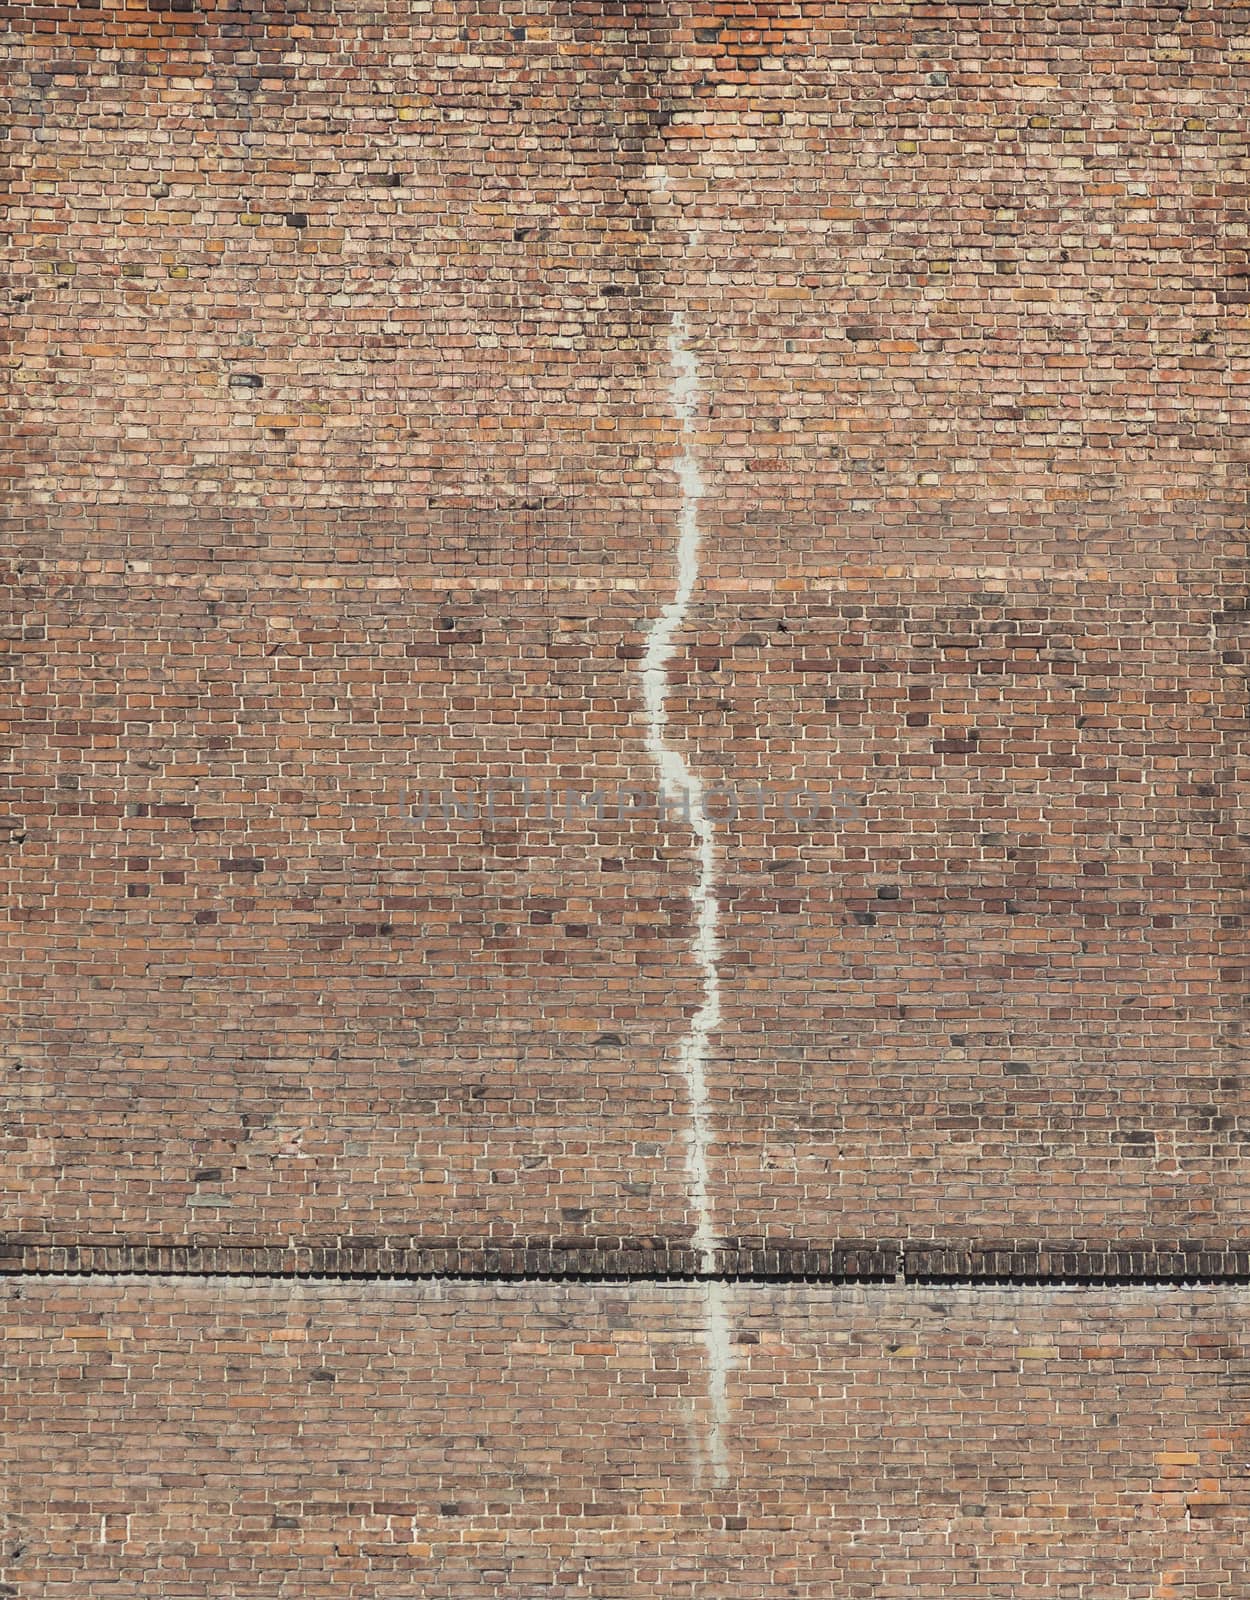 texture of a brick wall close-up by MegaArt